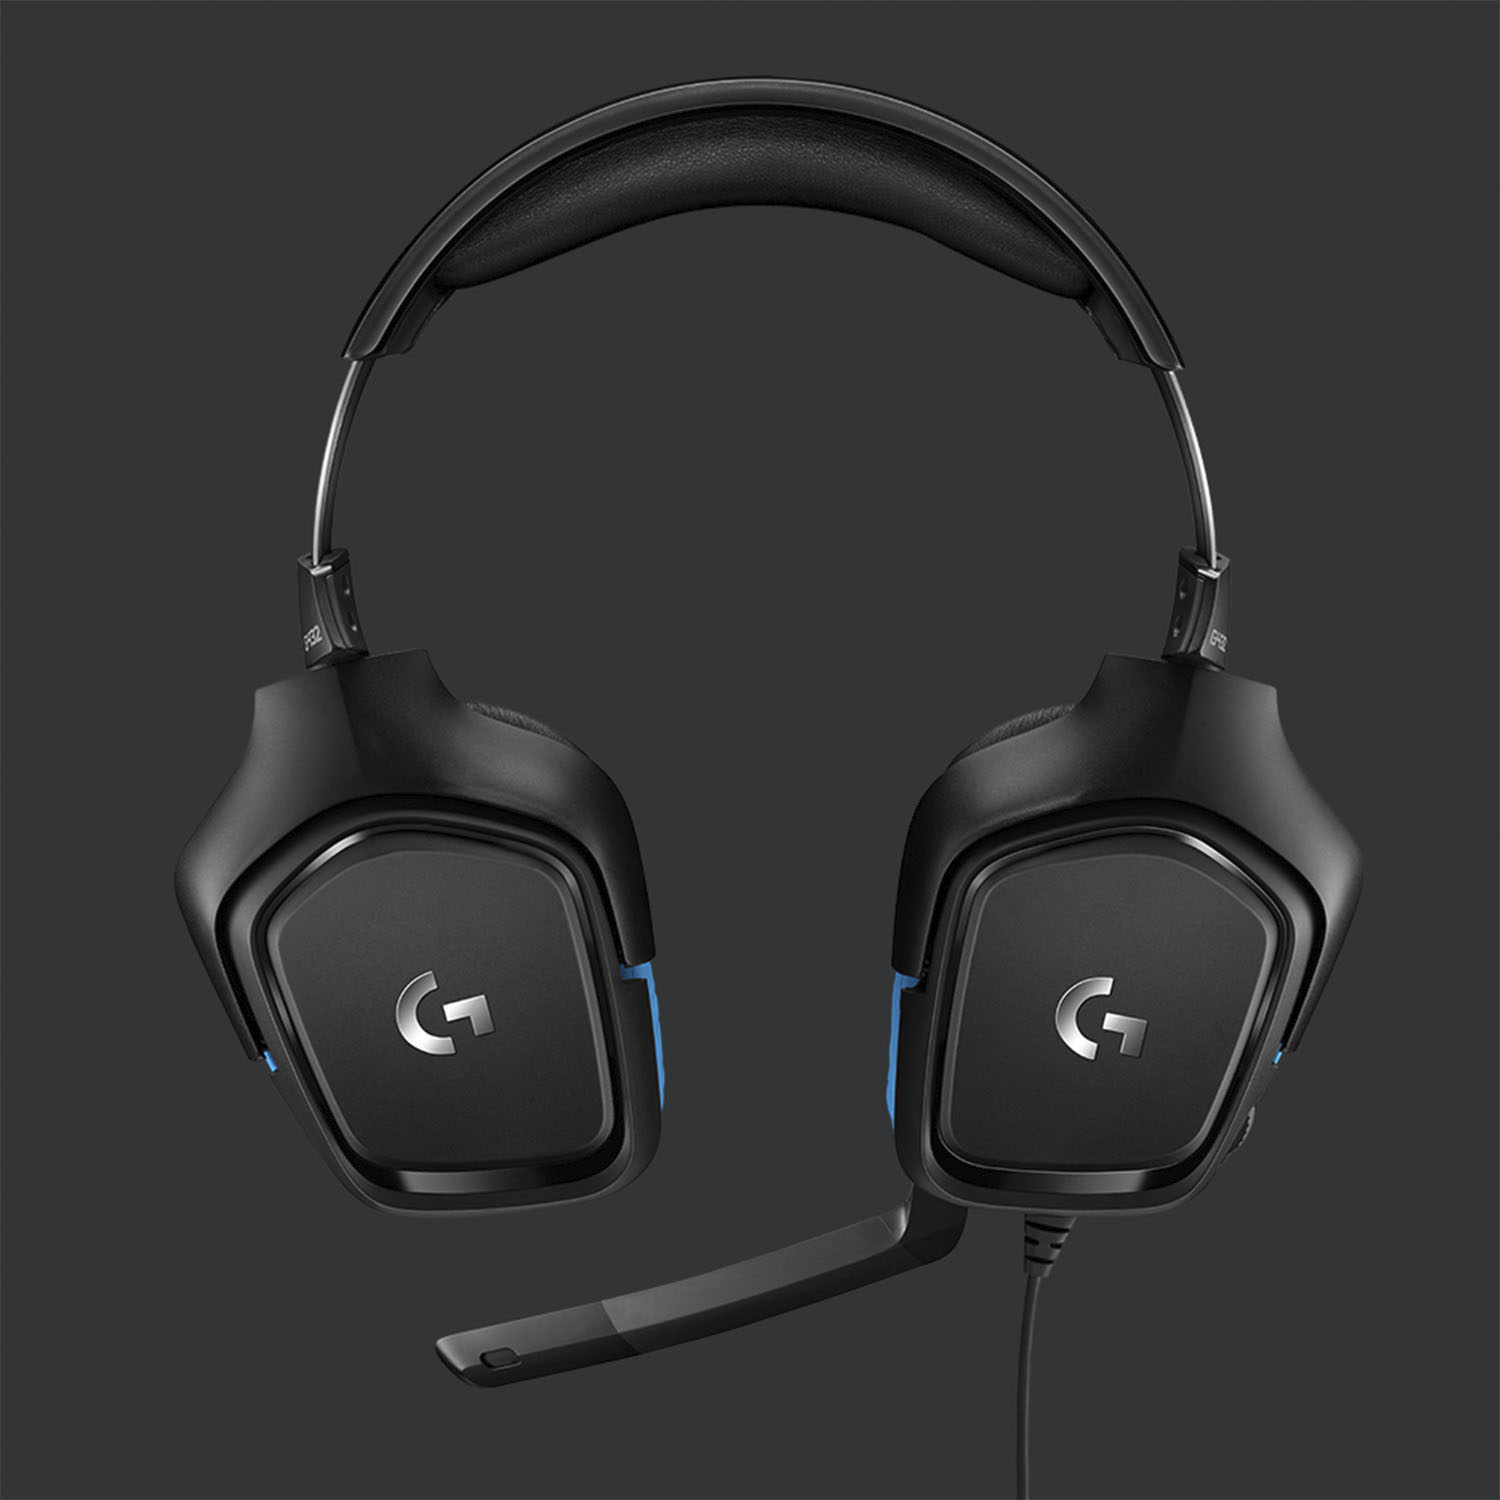 Logitech G432 Wired DTS Headphone:X 2.0 Surround Sound Over-the-Ear Gaming Headset for PC with Flip-to-Mute Black/Blue 981-000769 - Best Buy